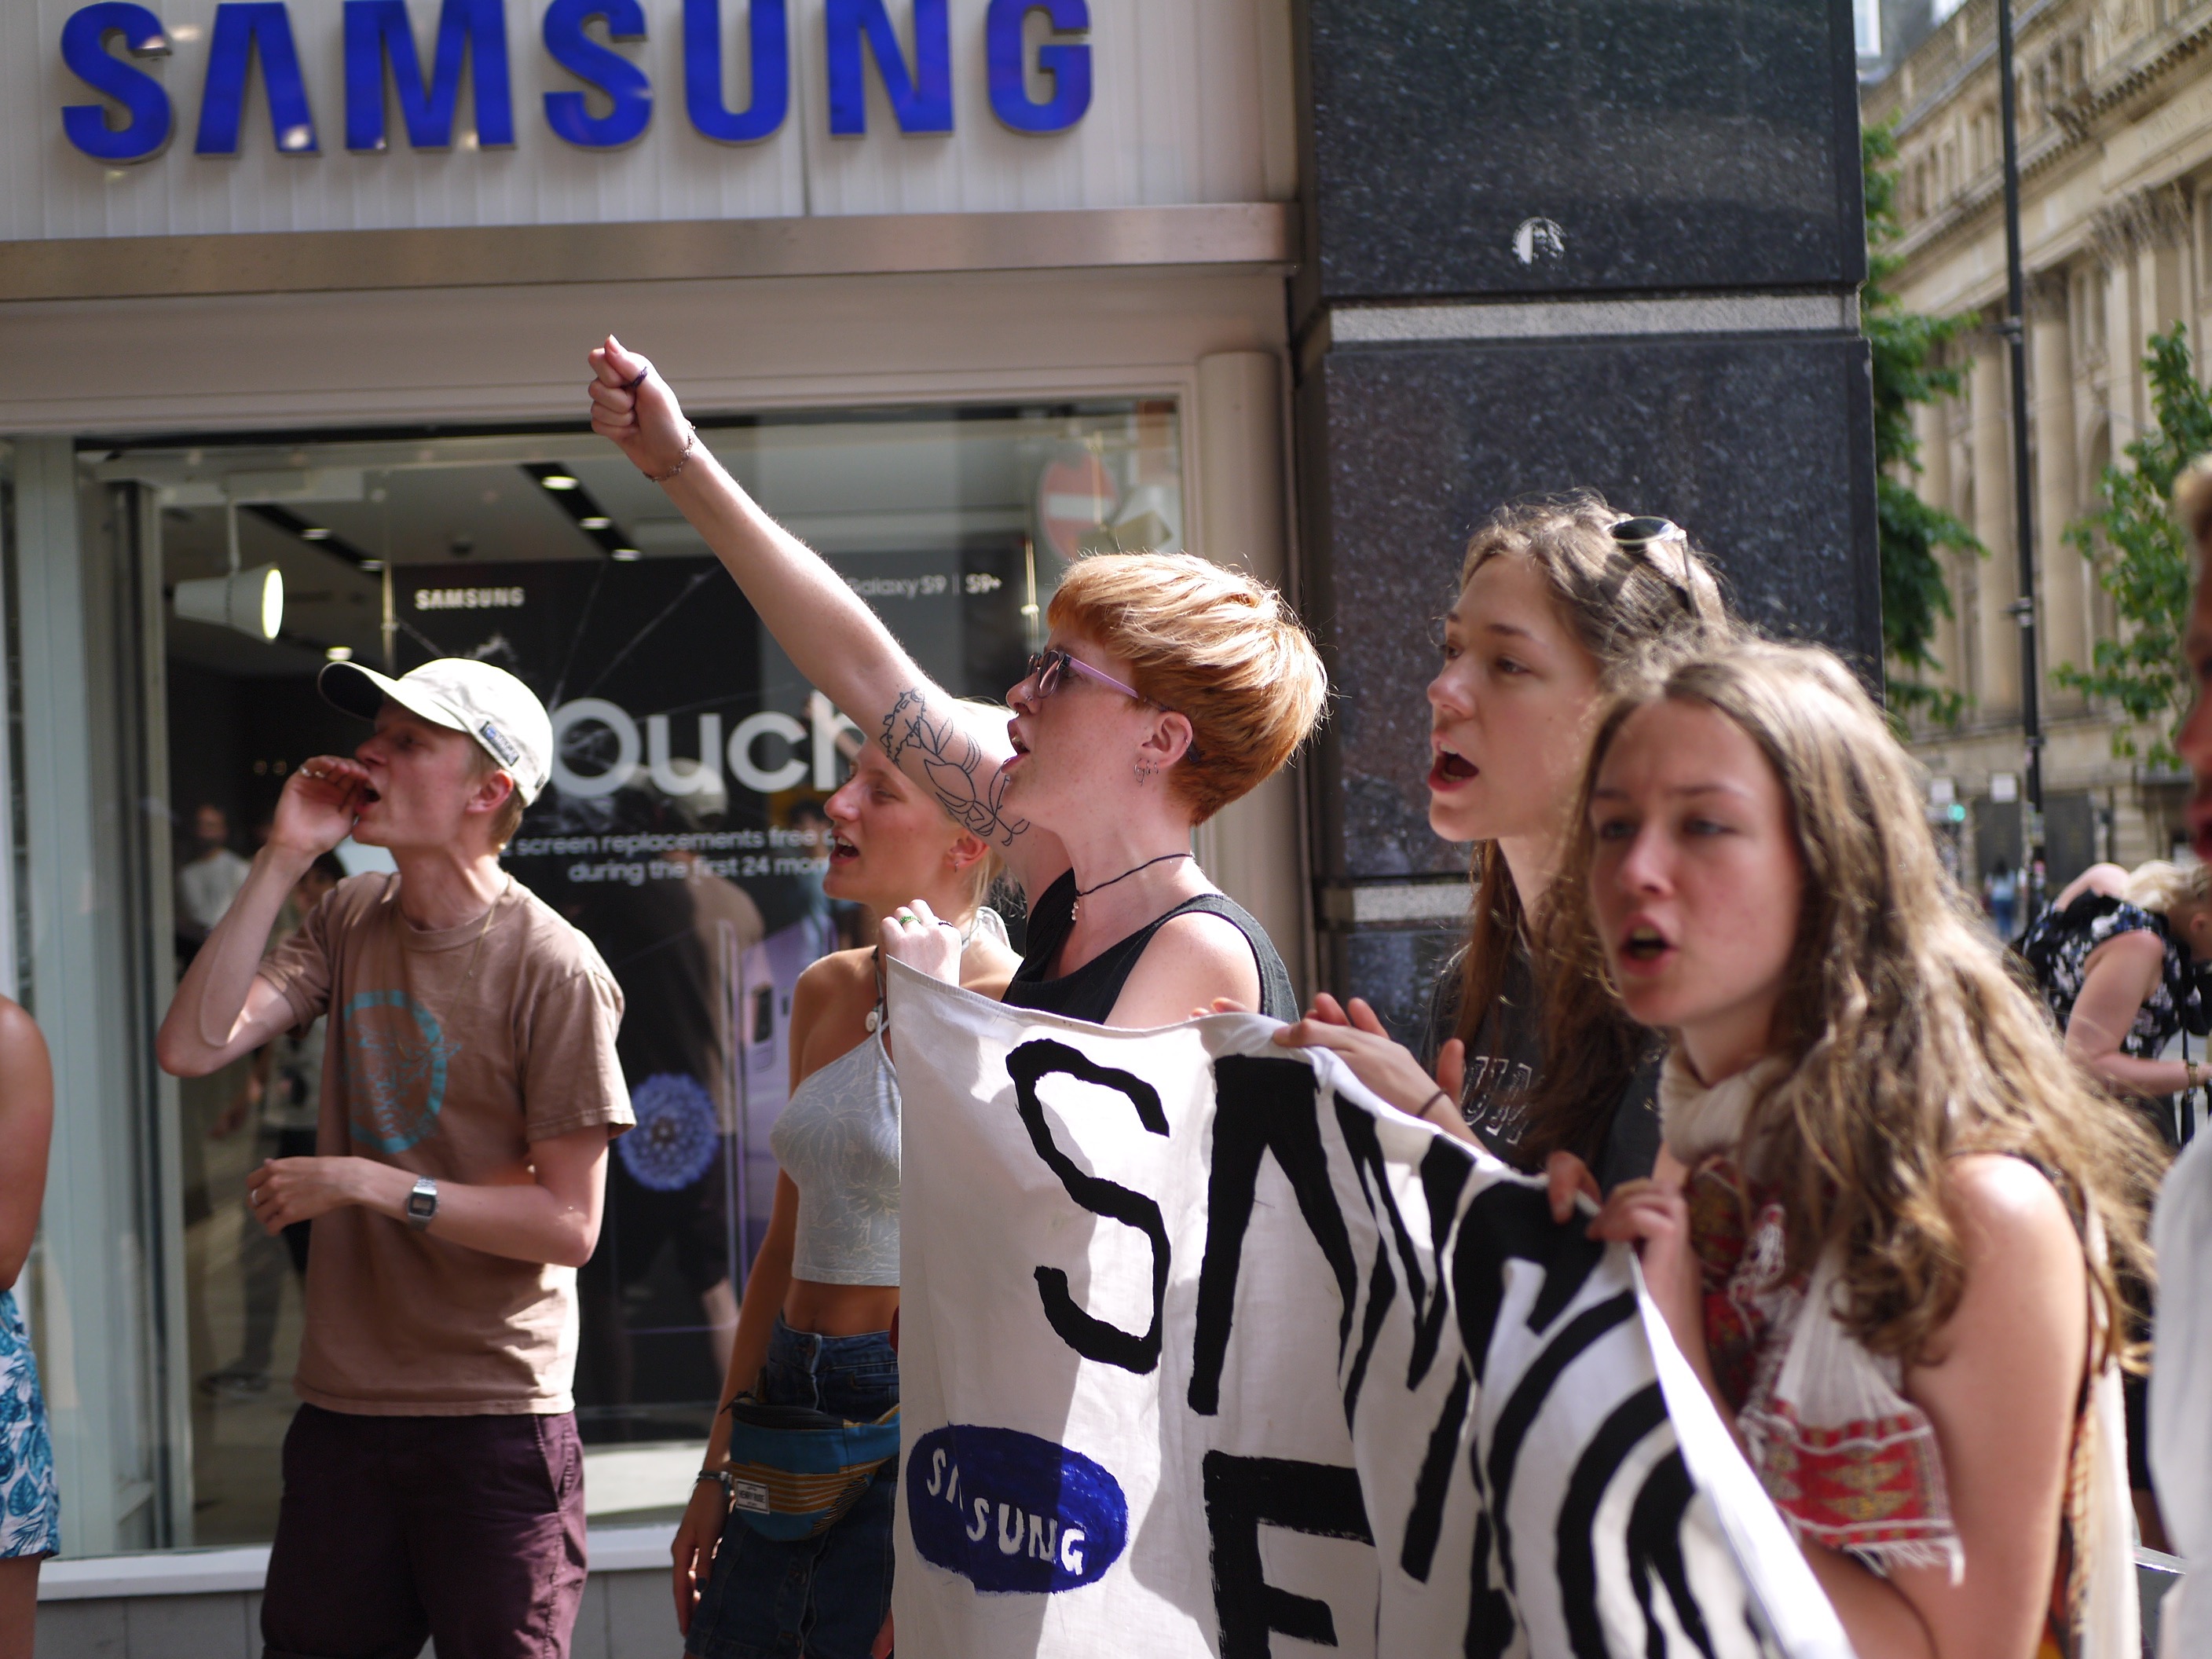 five student activists protest outside a Samsung outlet. They are holding a banner and chanting.